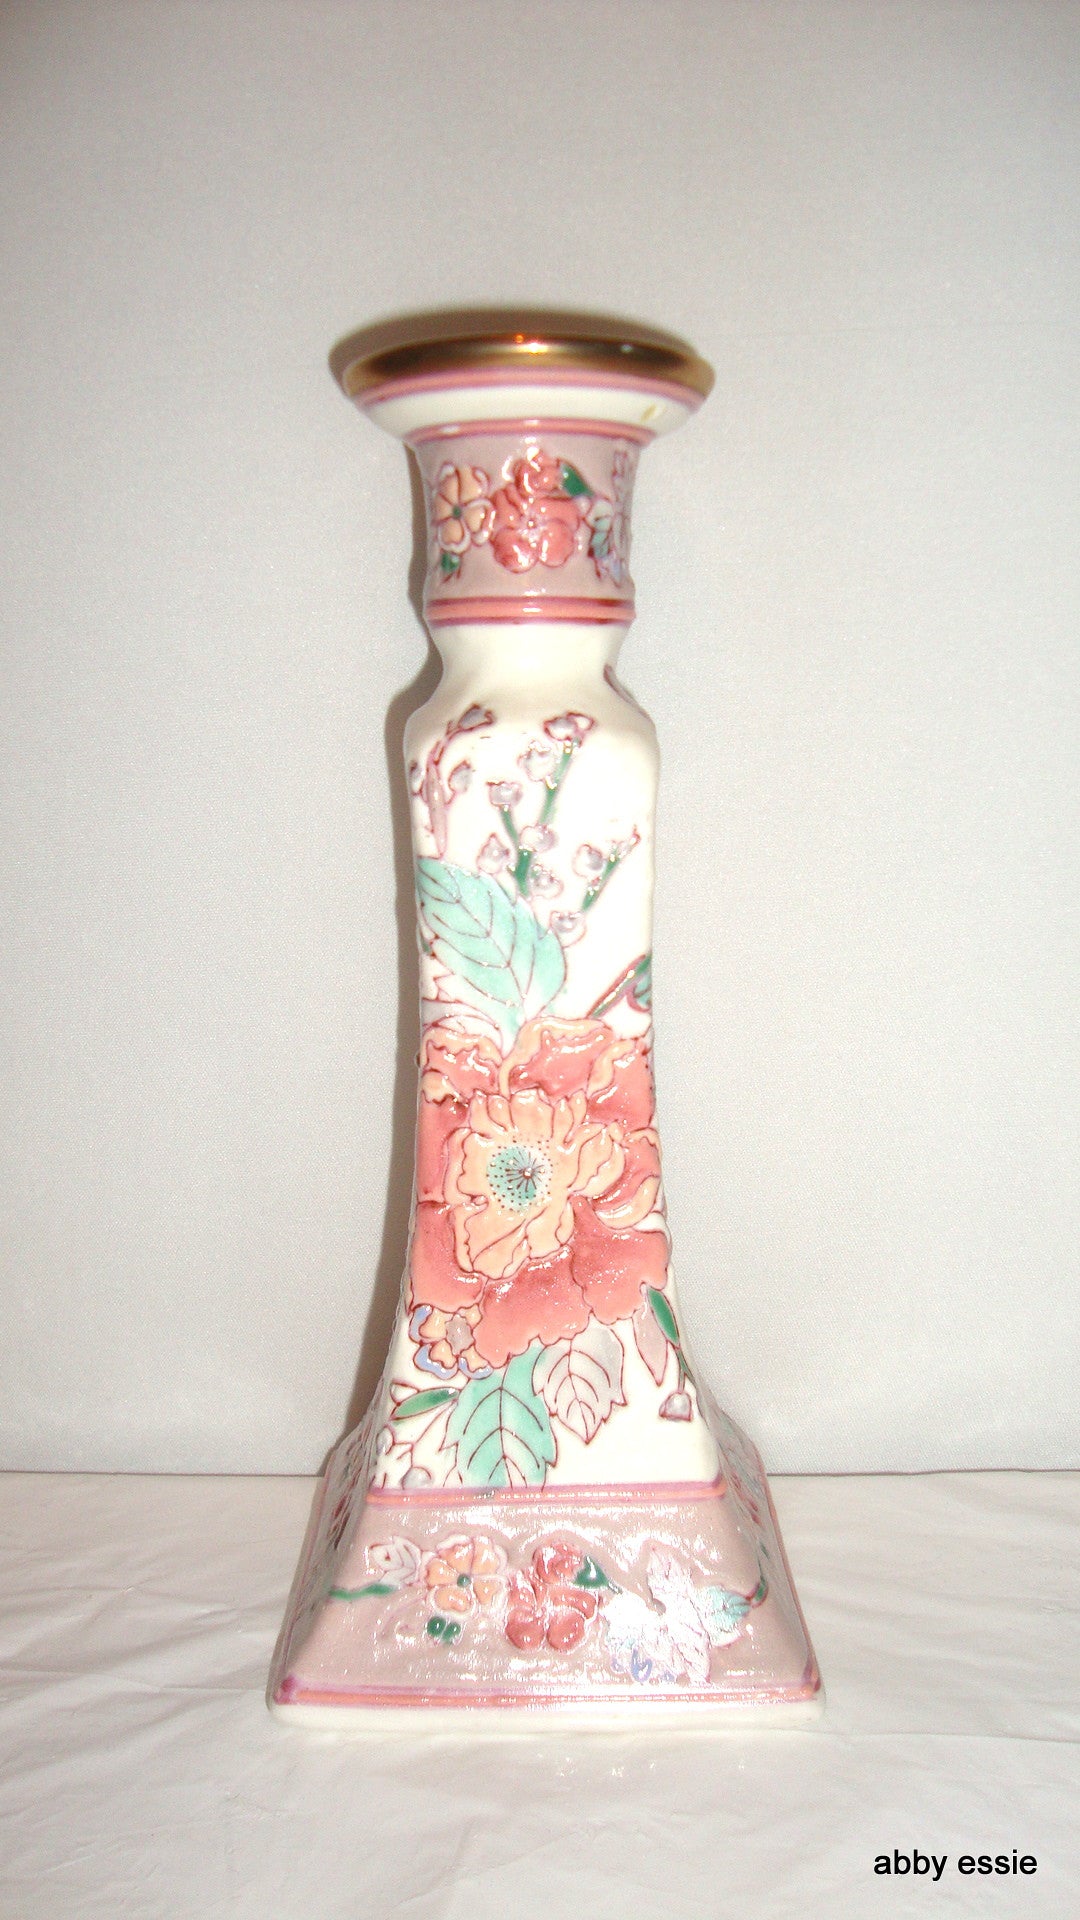 ONE PEACH BLOSSOM FLORAL ASIAN HAND PAINTED CANDLE HOLDER CANDLESTICK Abby Essie